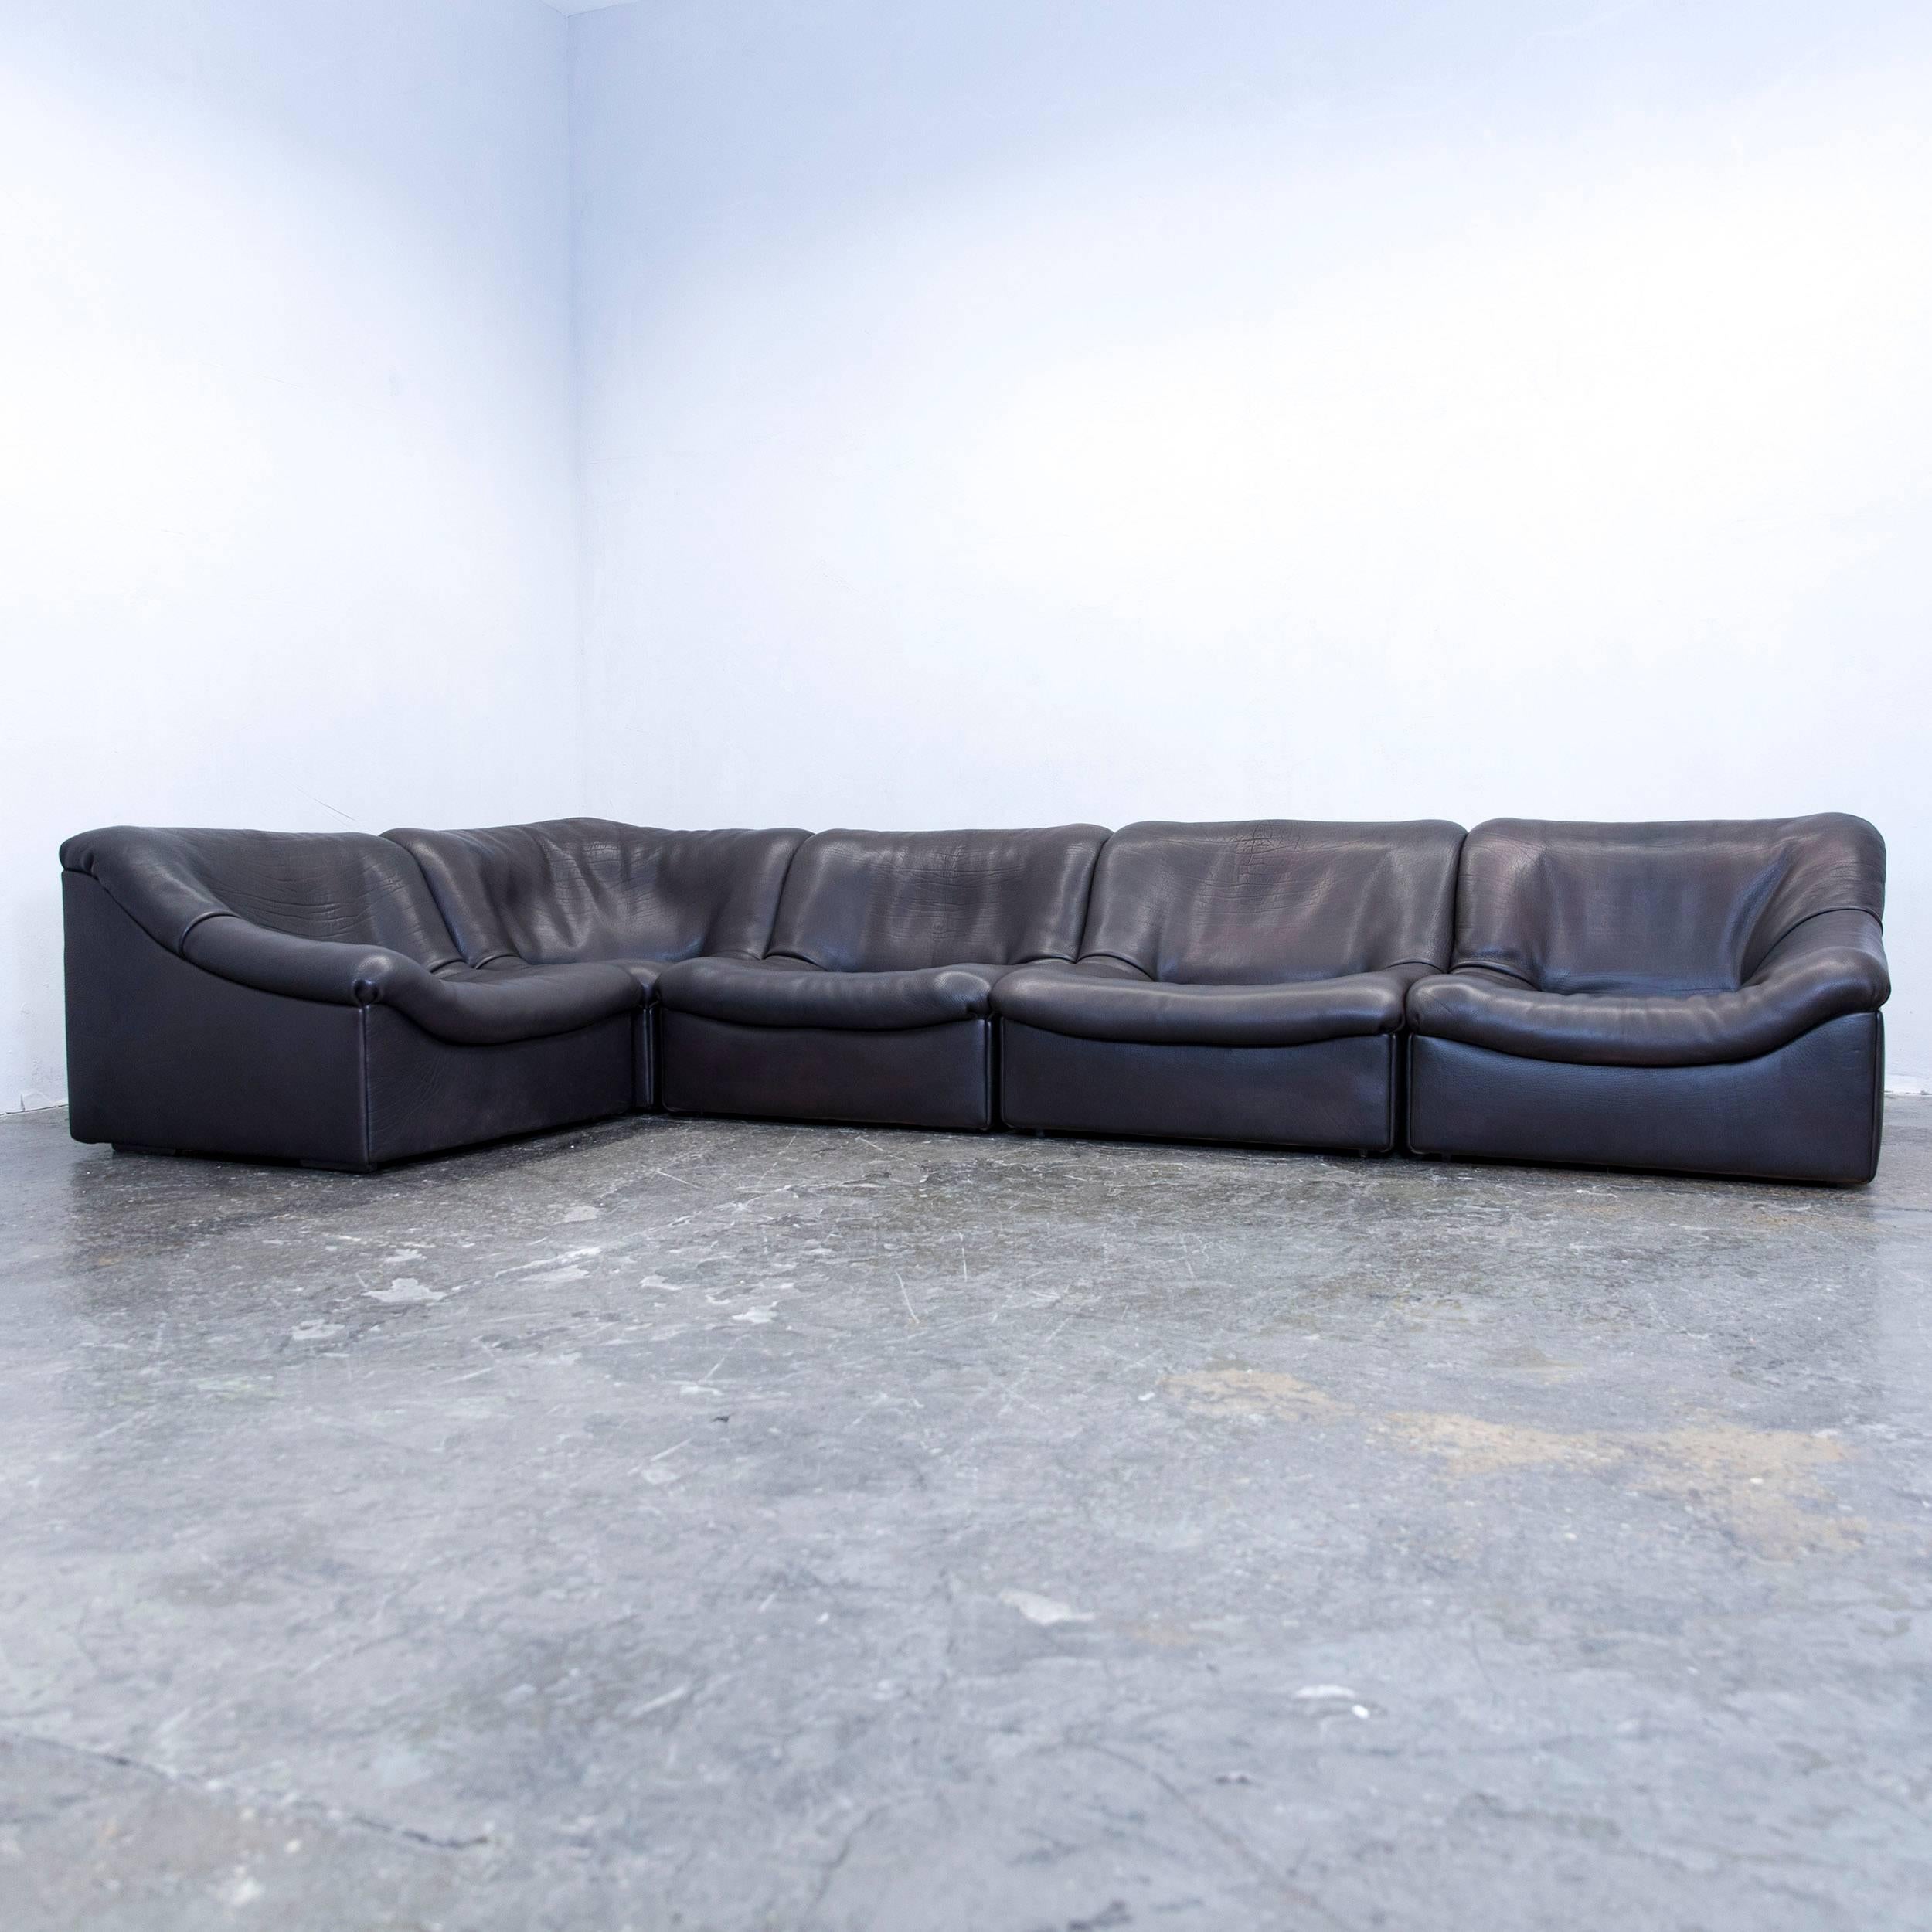 Black brown colored original De Sede DS designer leather corner sofa in a minimalistic and modern design, with a convenient modular function, made for pure comfort and flexibility.